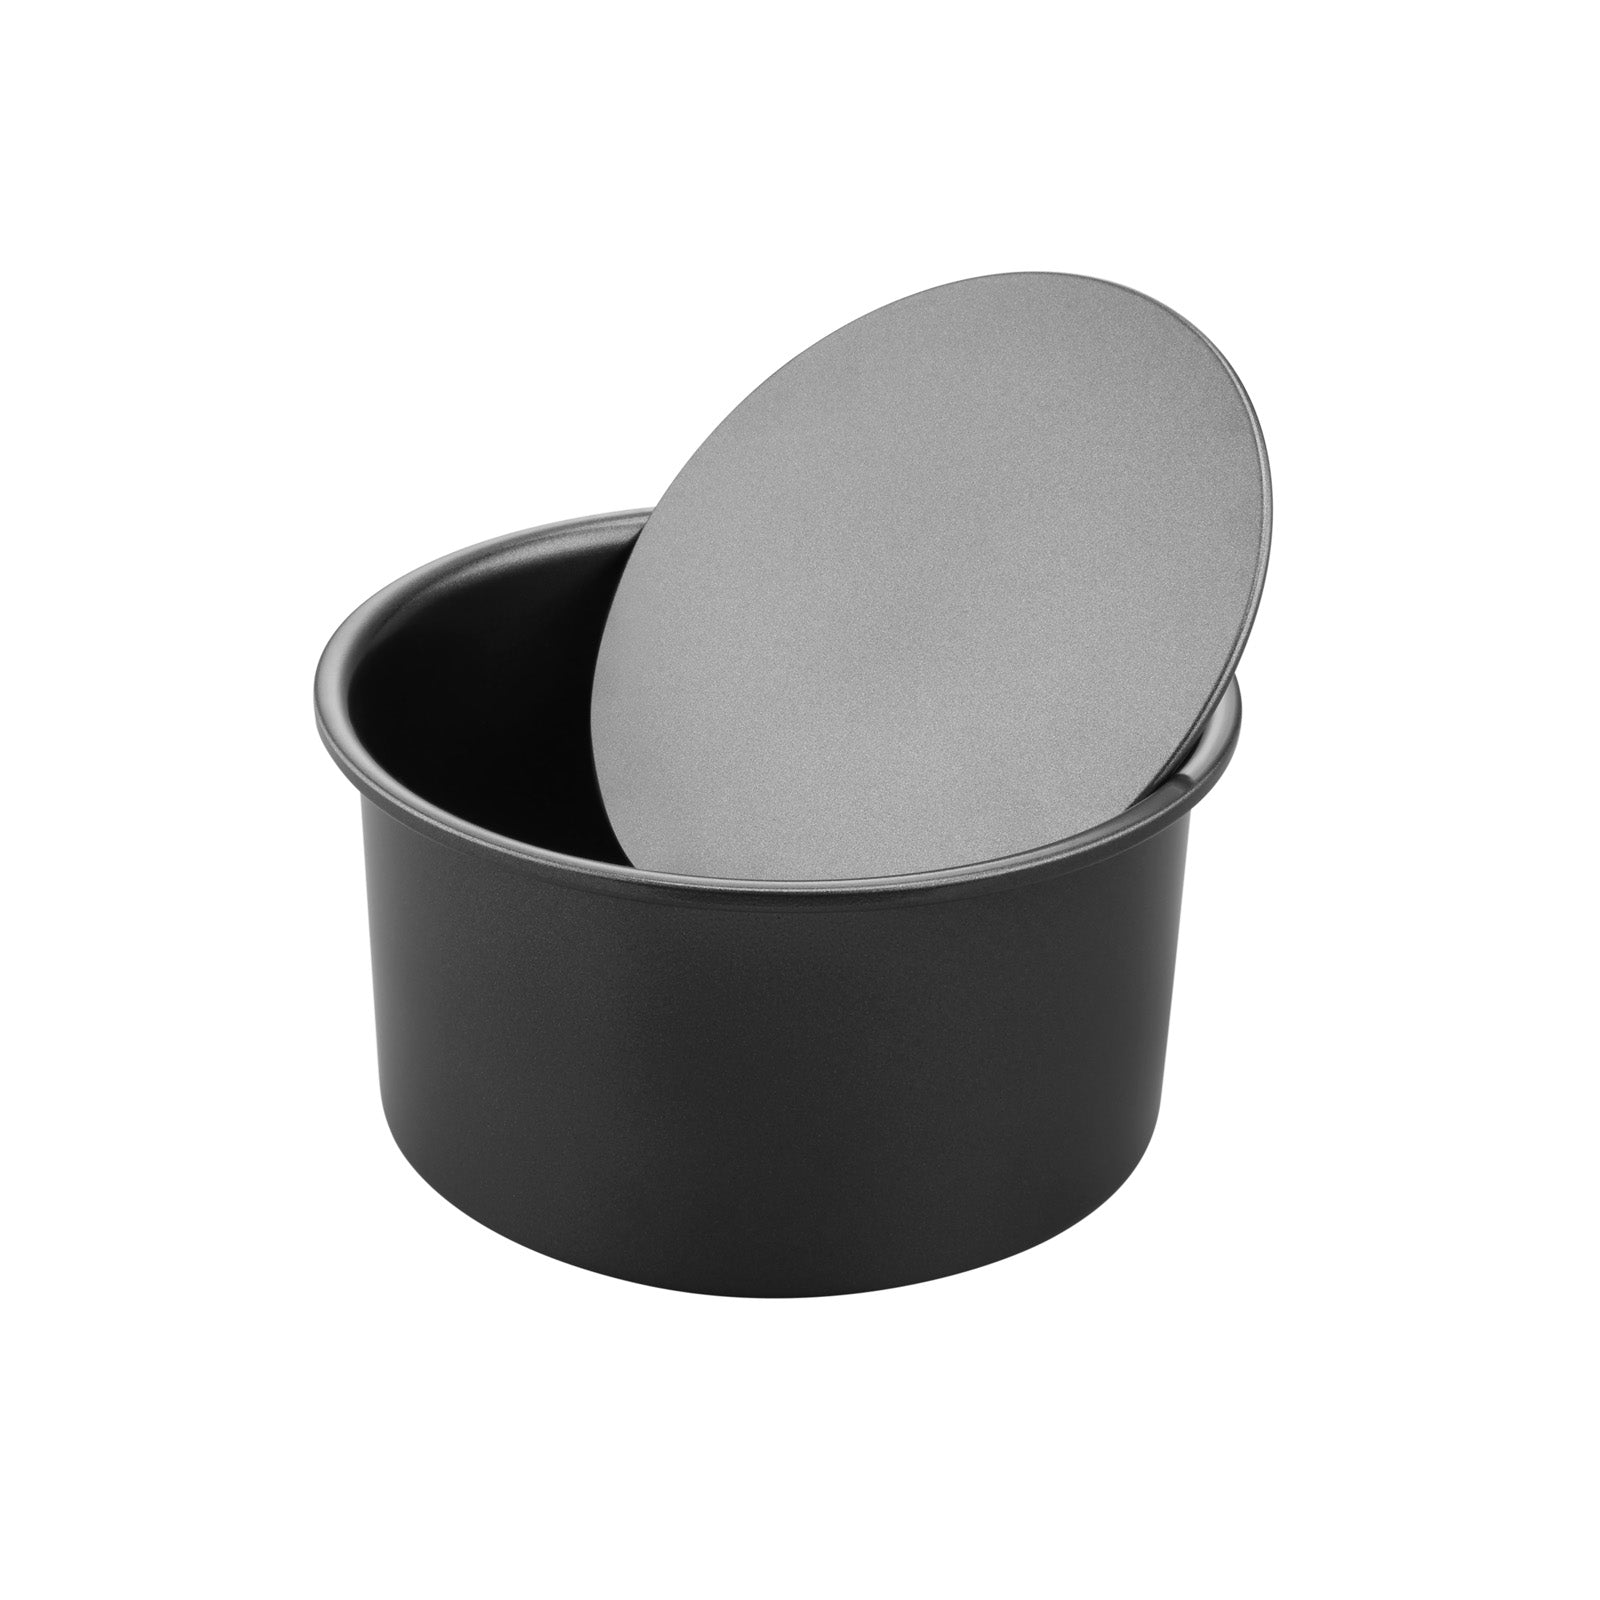 6" Round Cake Pan with Removable Bottom (Black)